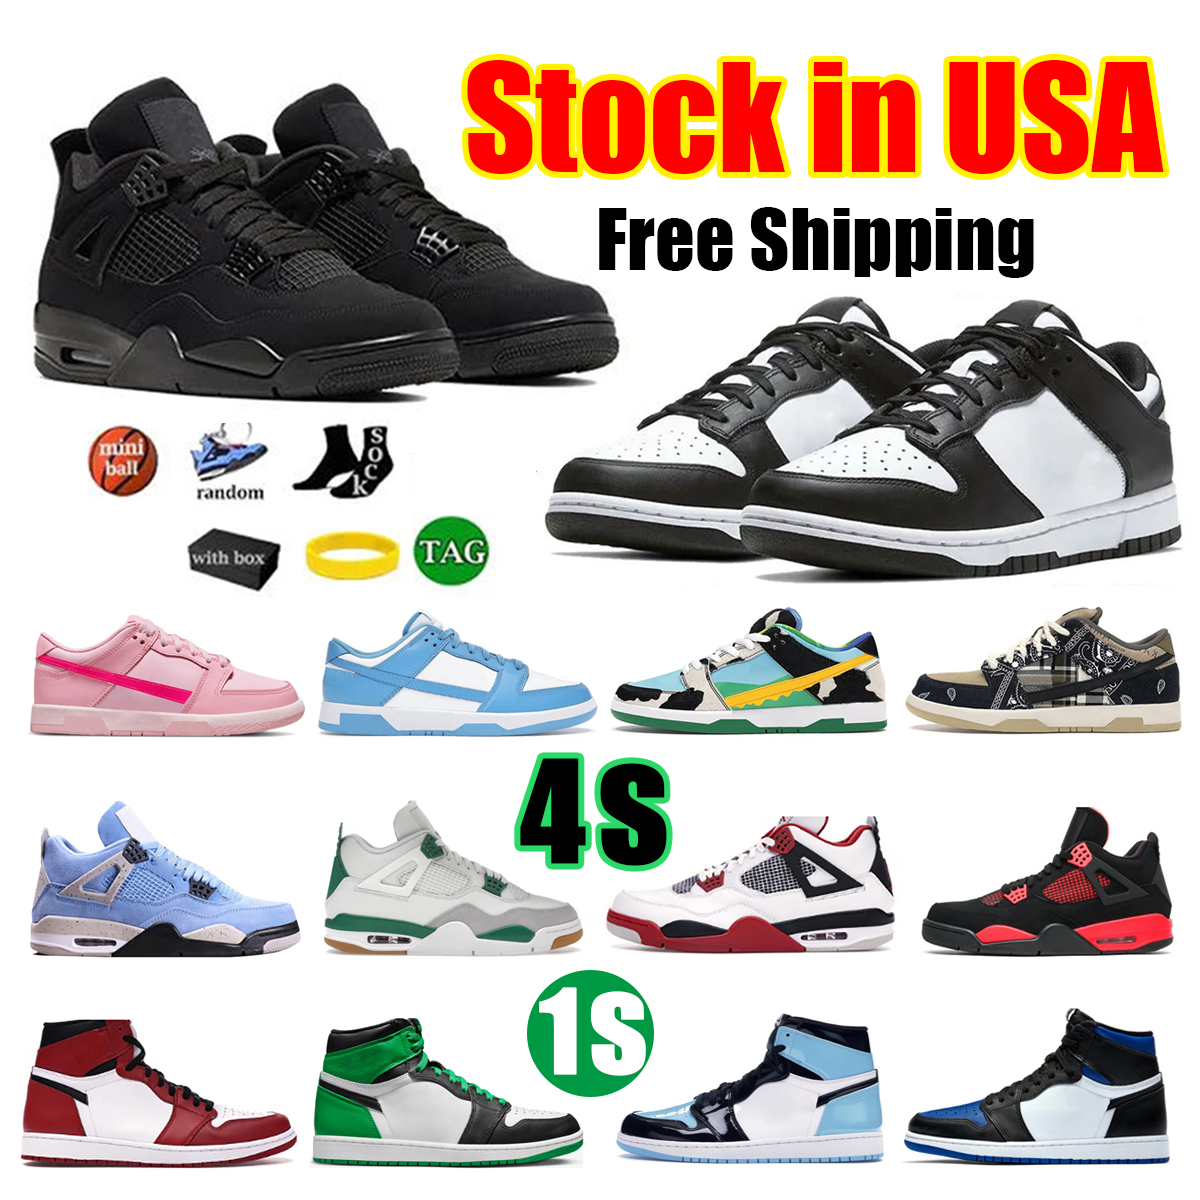 

Box With Basketball 4s Shoes Jumpman 1s Panda Local Warehouse Men Women White Black Cat Chicago Lost And Found Sport Sneakers Designer Mens Trainers Stock In USA 2023, 30